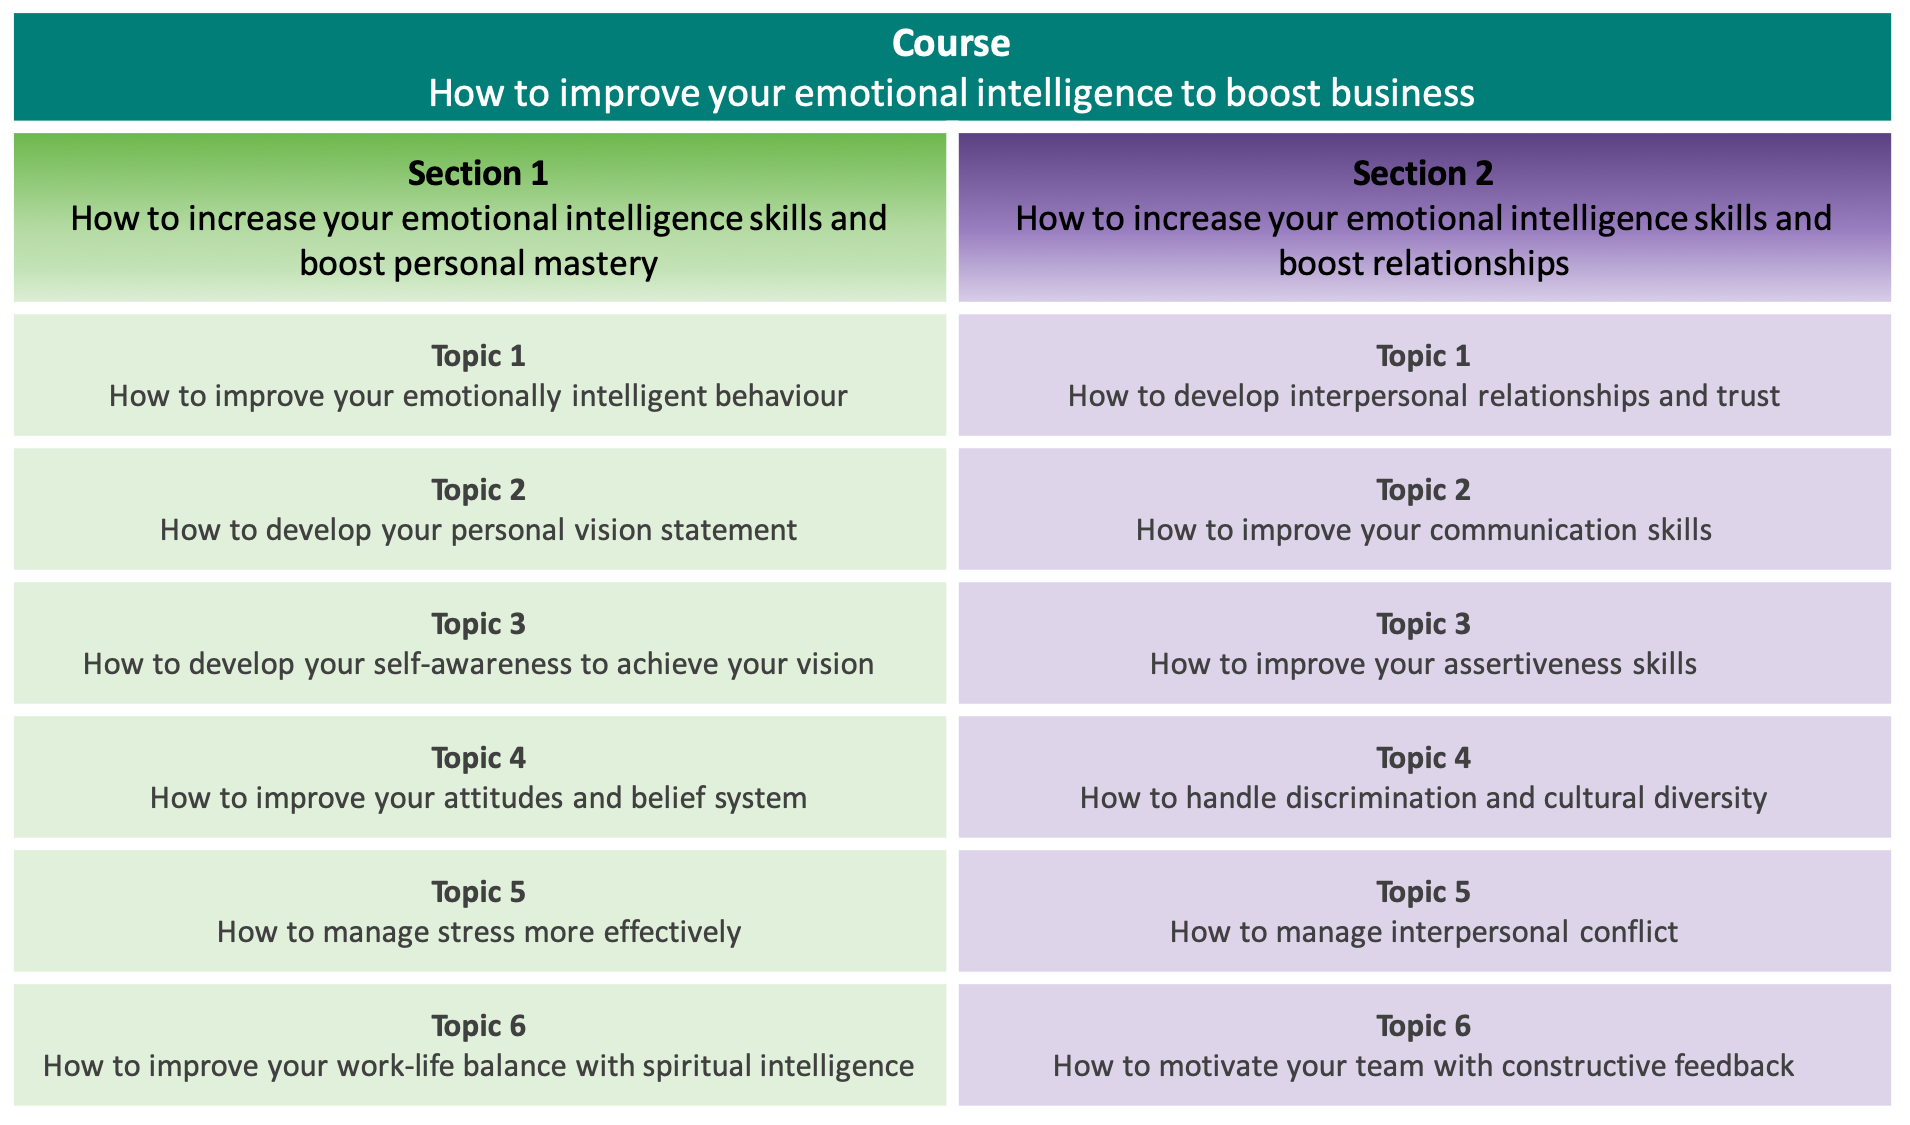 How to improve your emotional intelligence to boost business